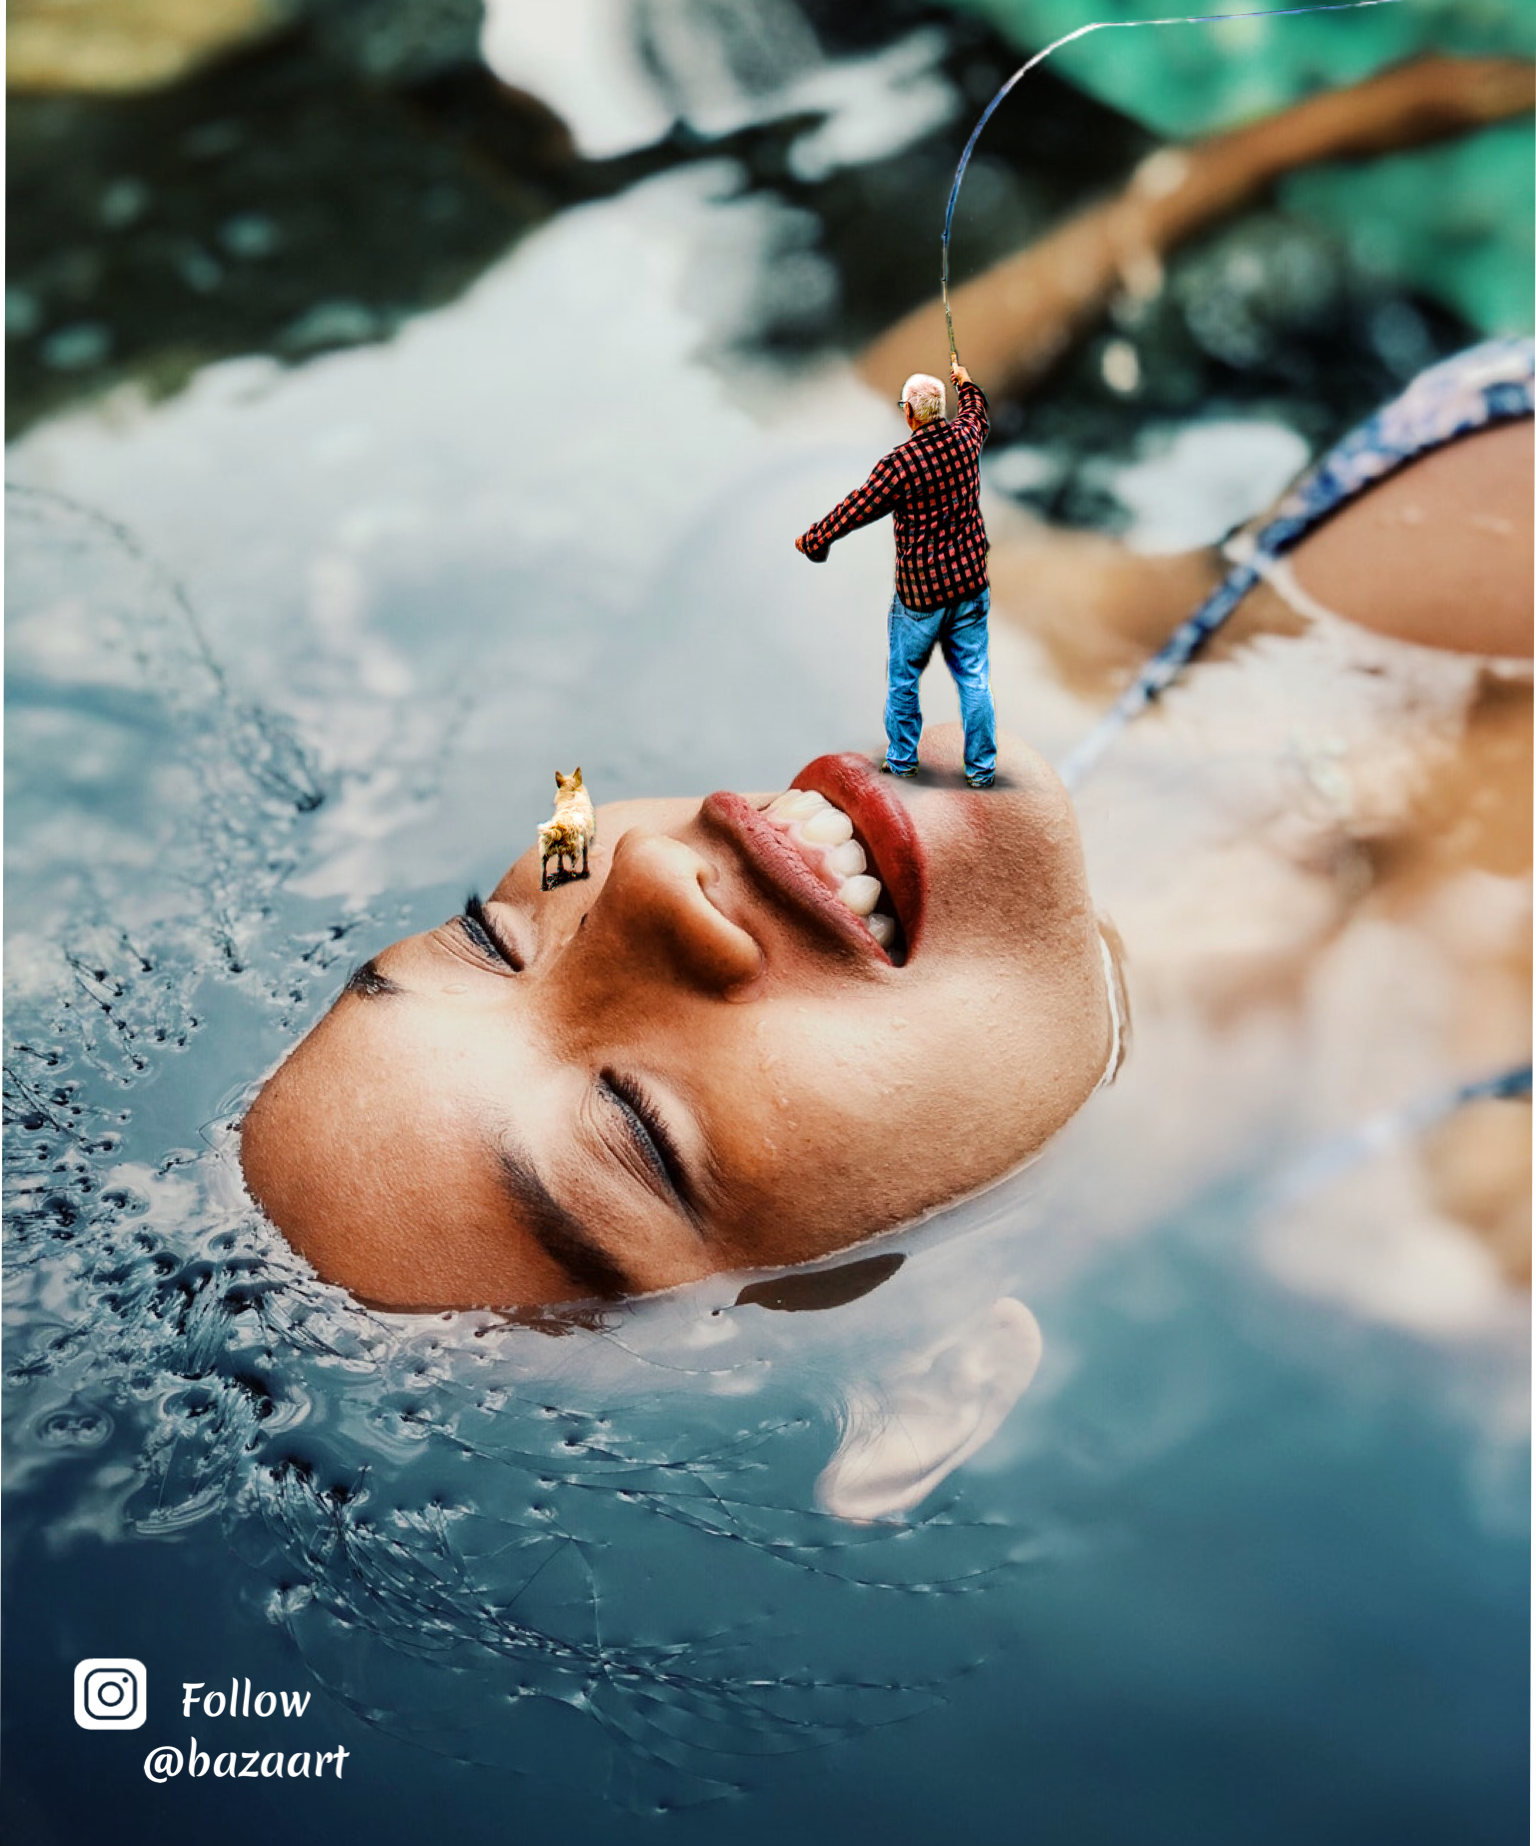 Man fishing on woman's face while she swims collage art template